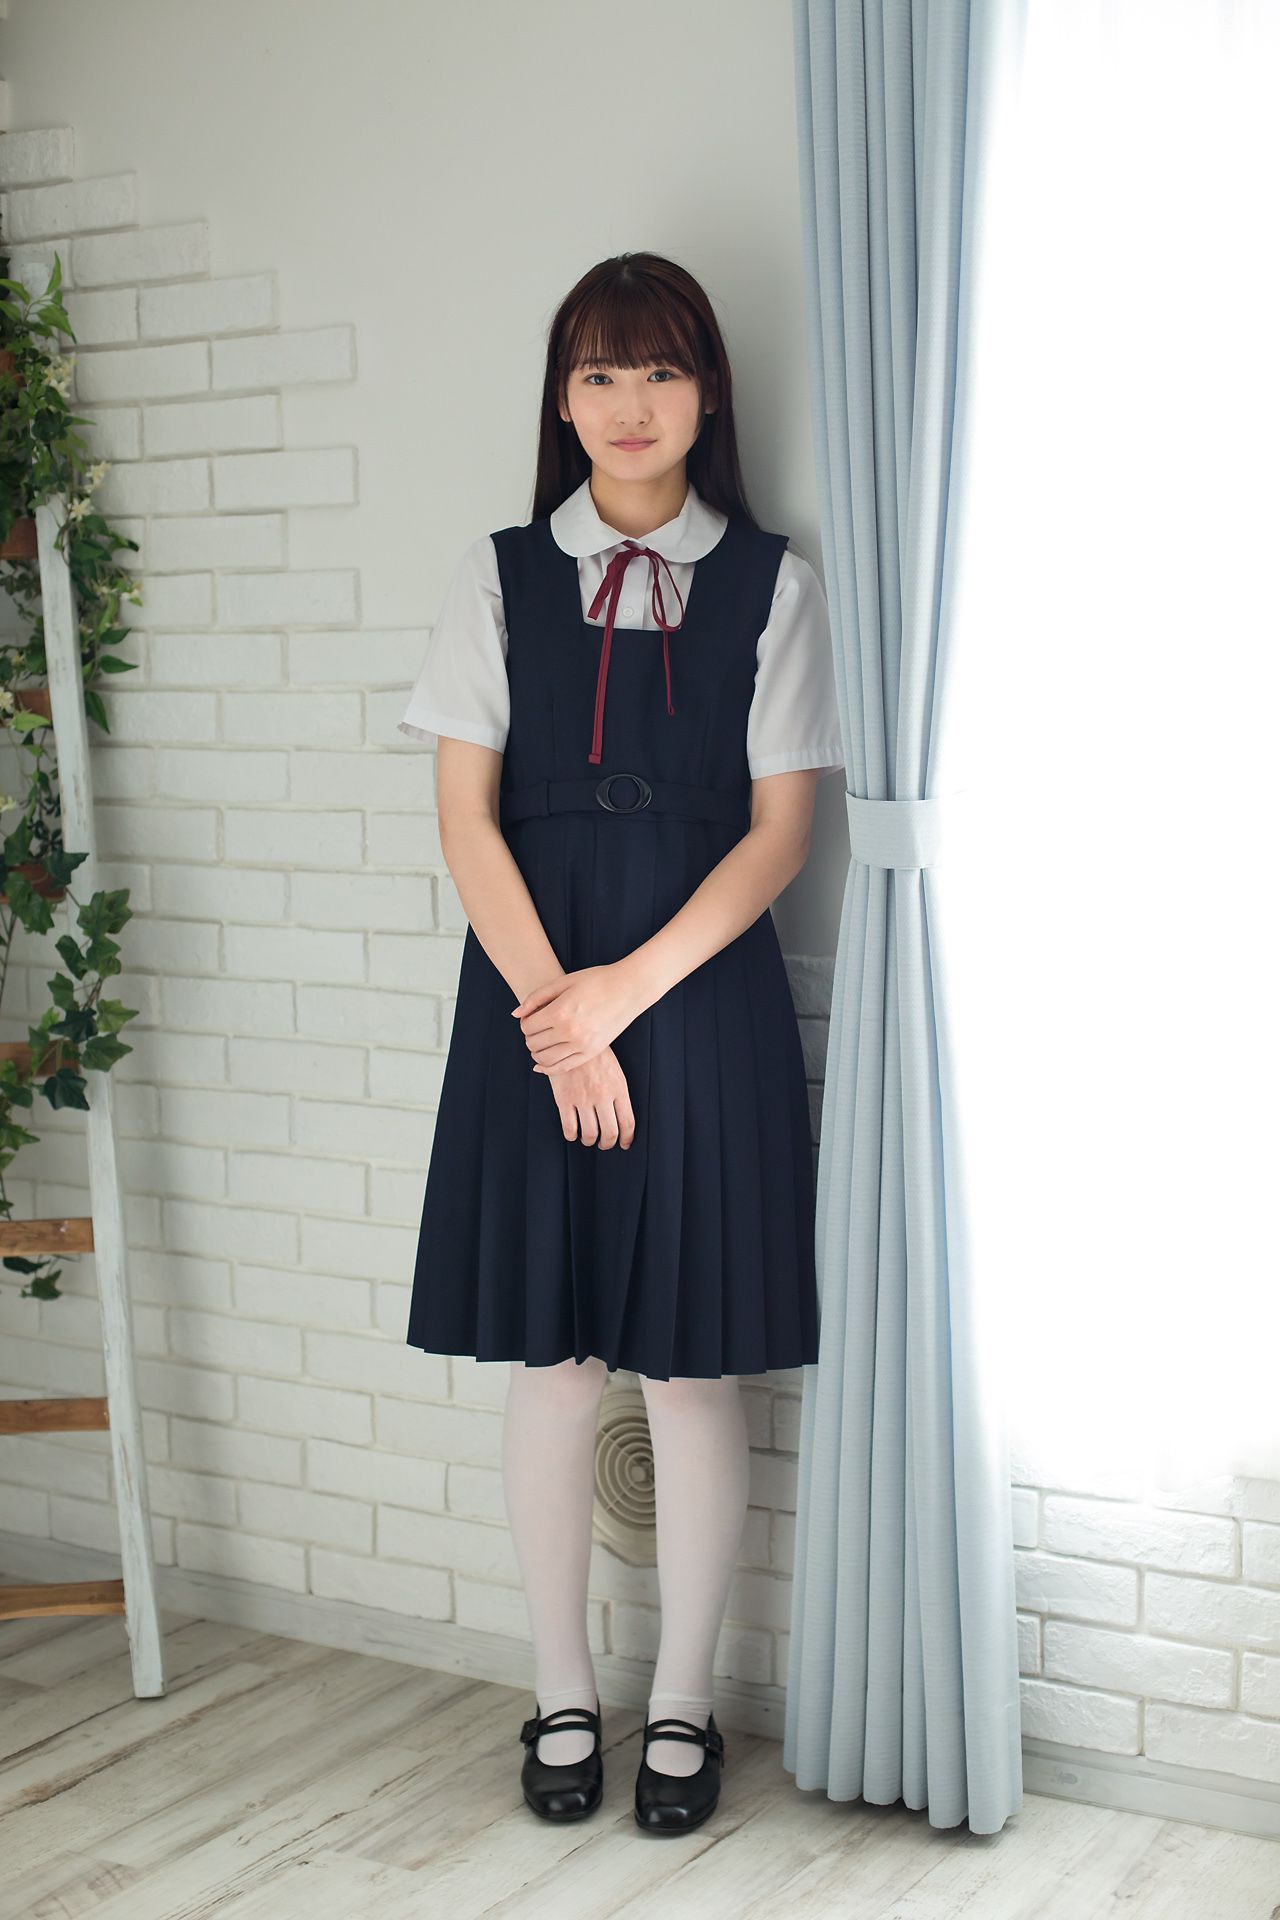 [Minisuka.tv] 近藤あさみ 白丝学生装 - Limited Gallery 18.1[33](第3页)